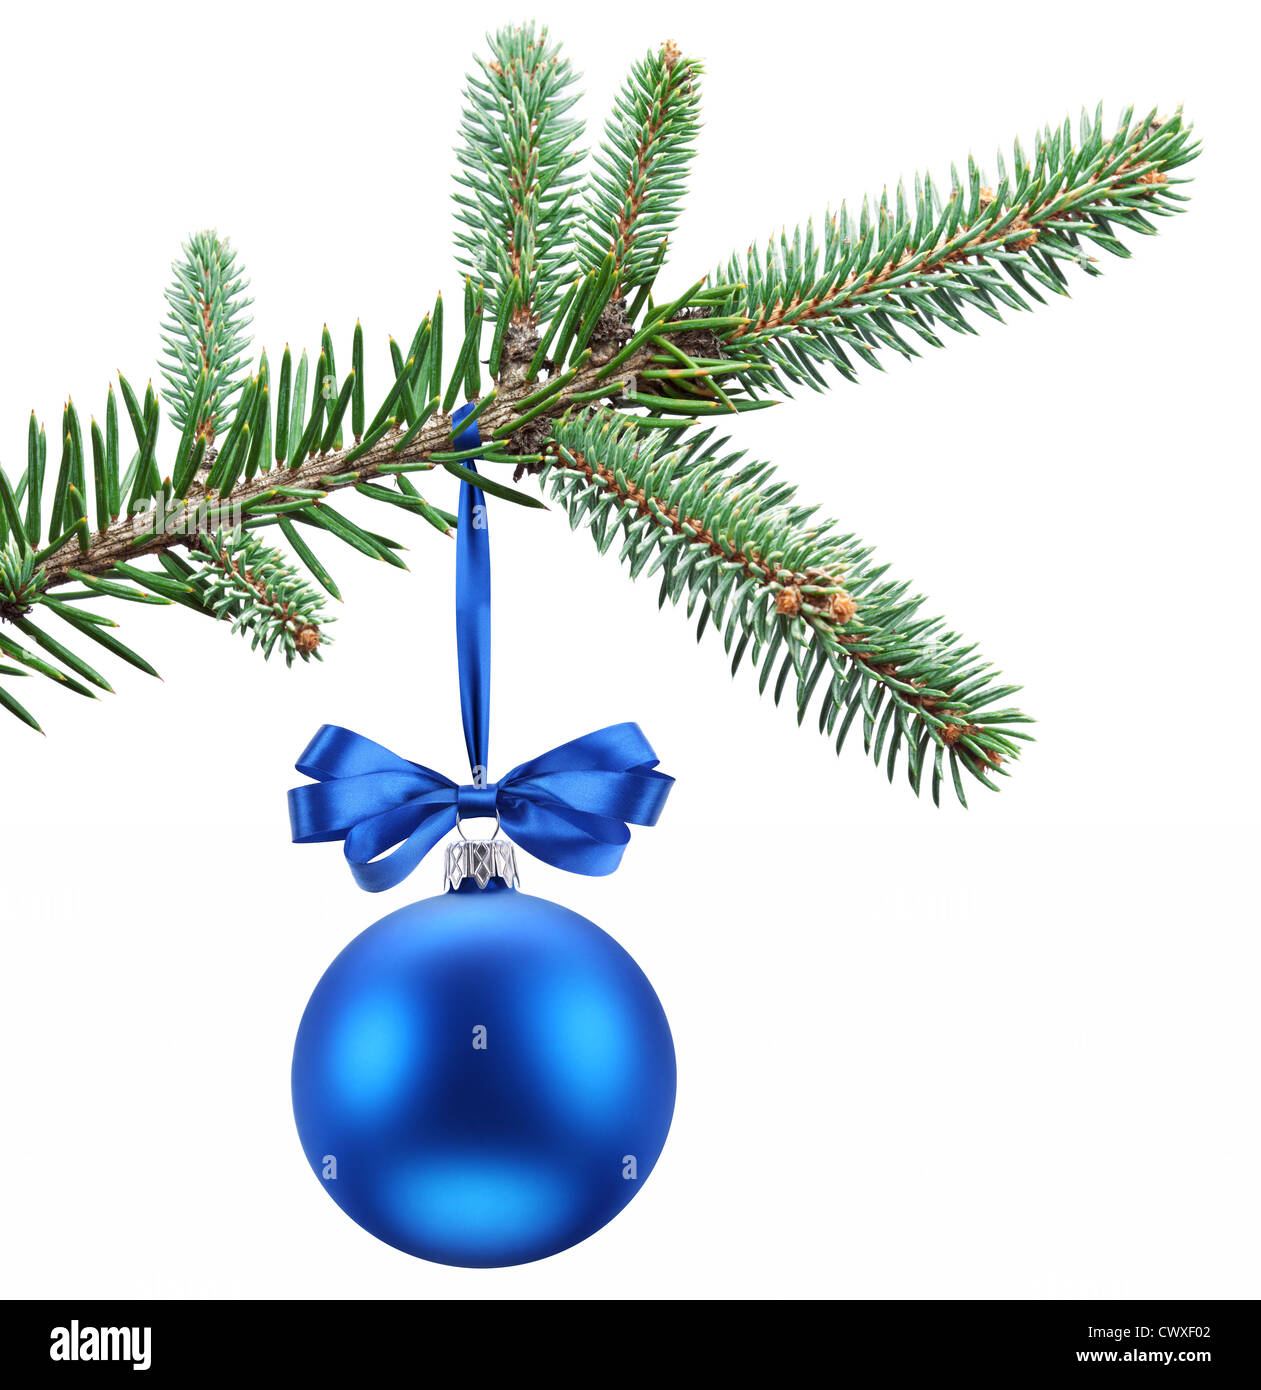 Christmas ball on fir branches. Isolated on white. Stock Photo